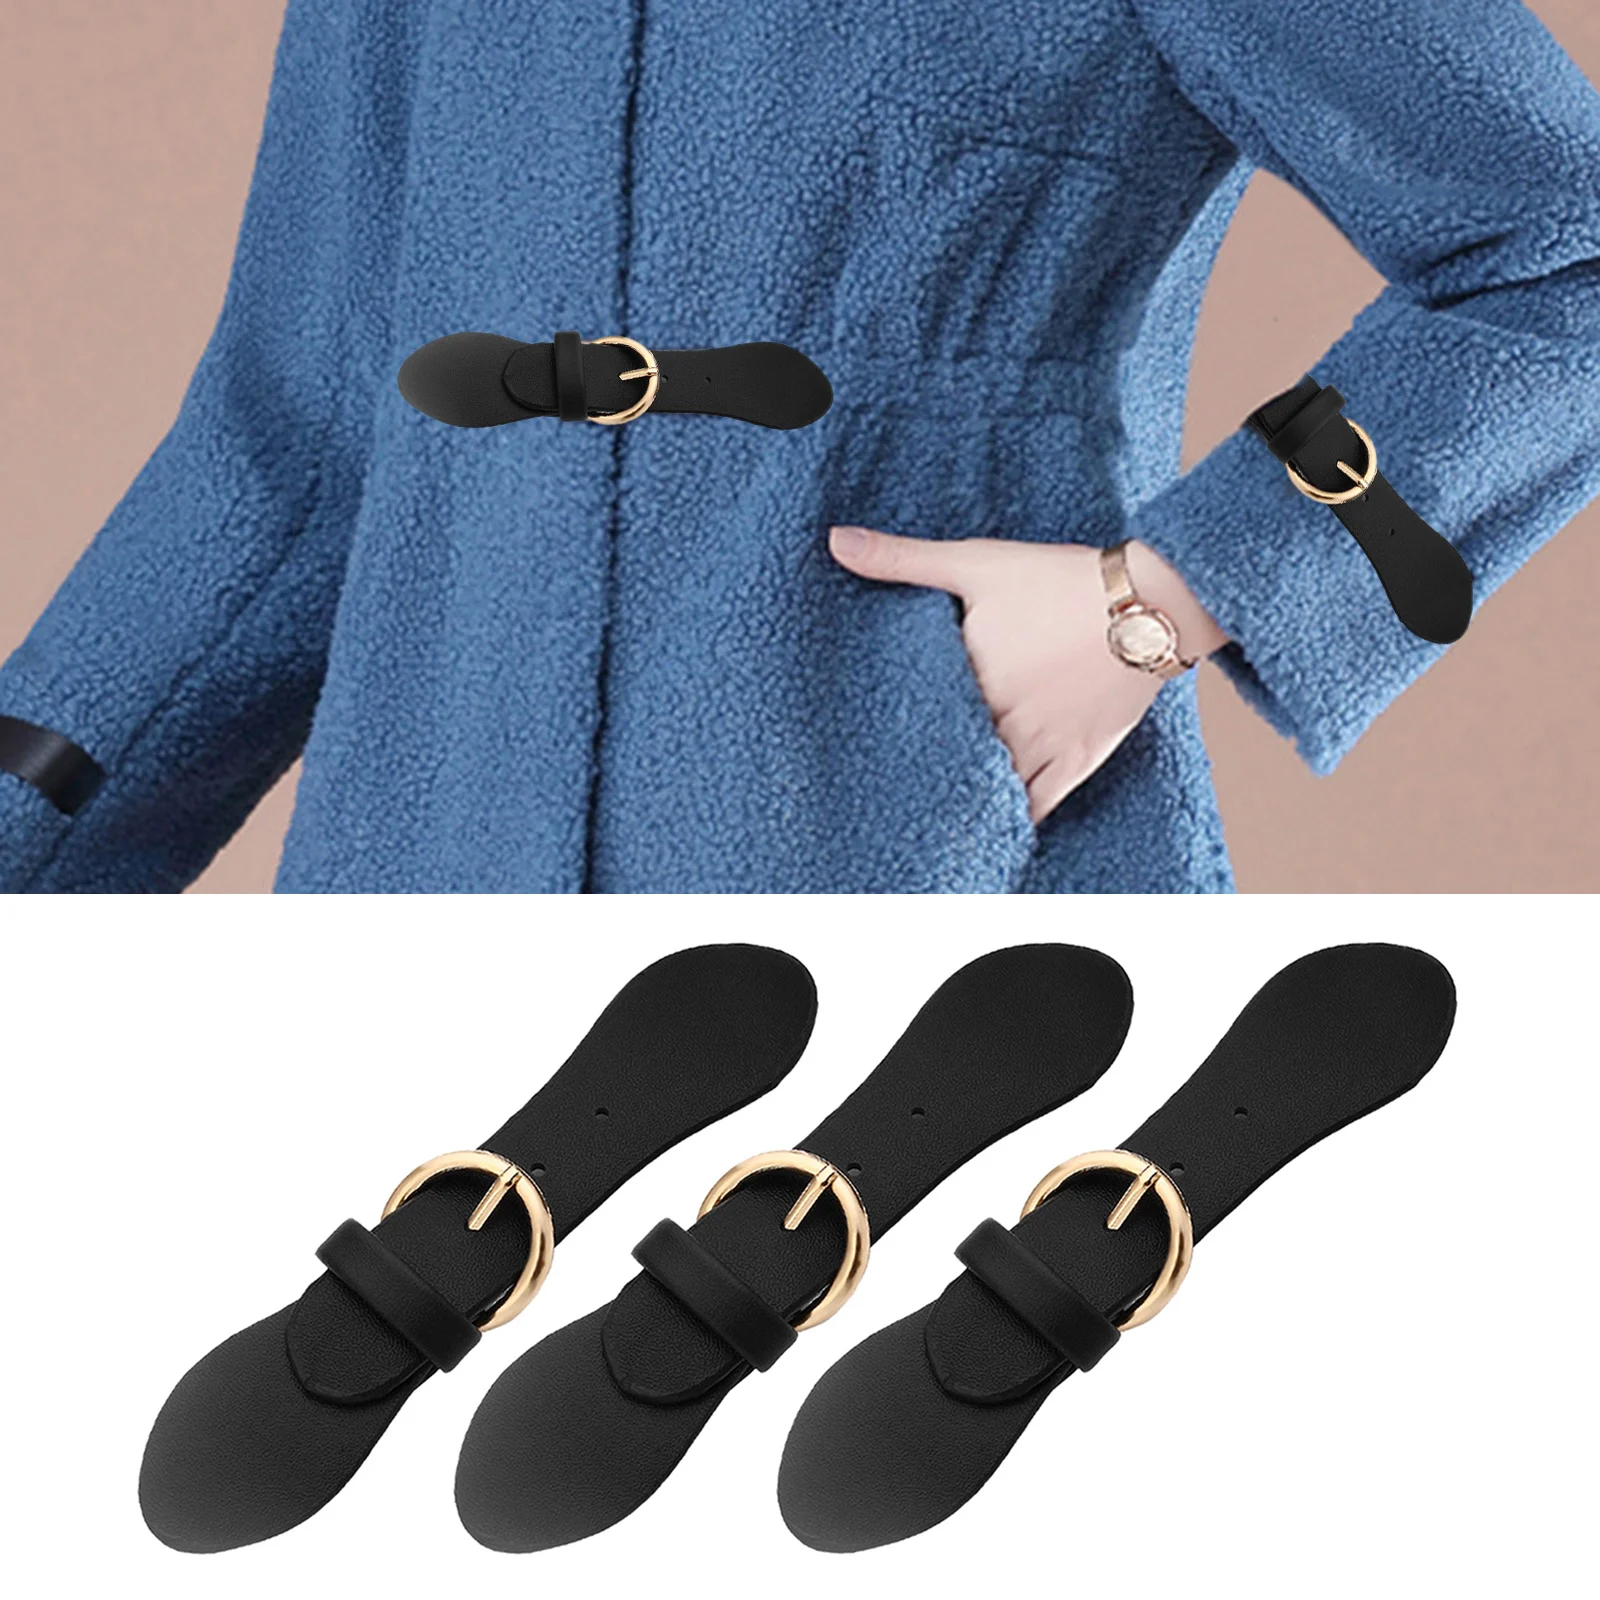 Duffle Coat Jacket Snap Sew-on Toggles Closures Button Sets Faux Leather for Bag Clothing Decoration Craft